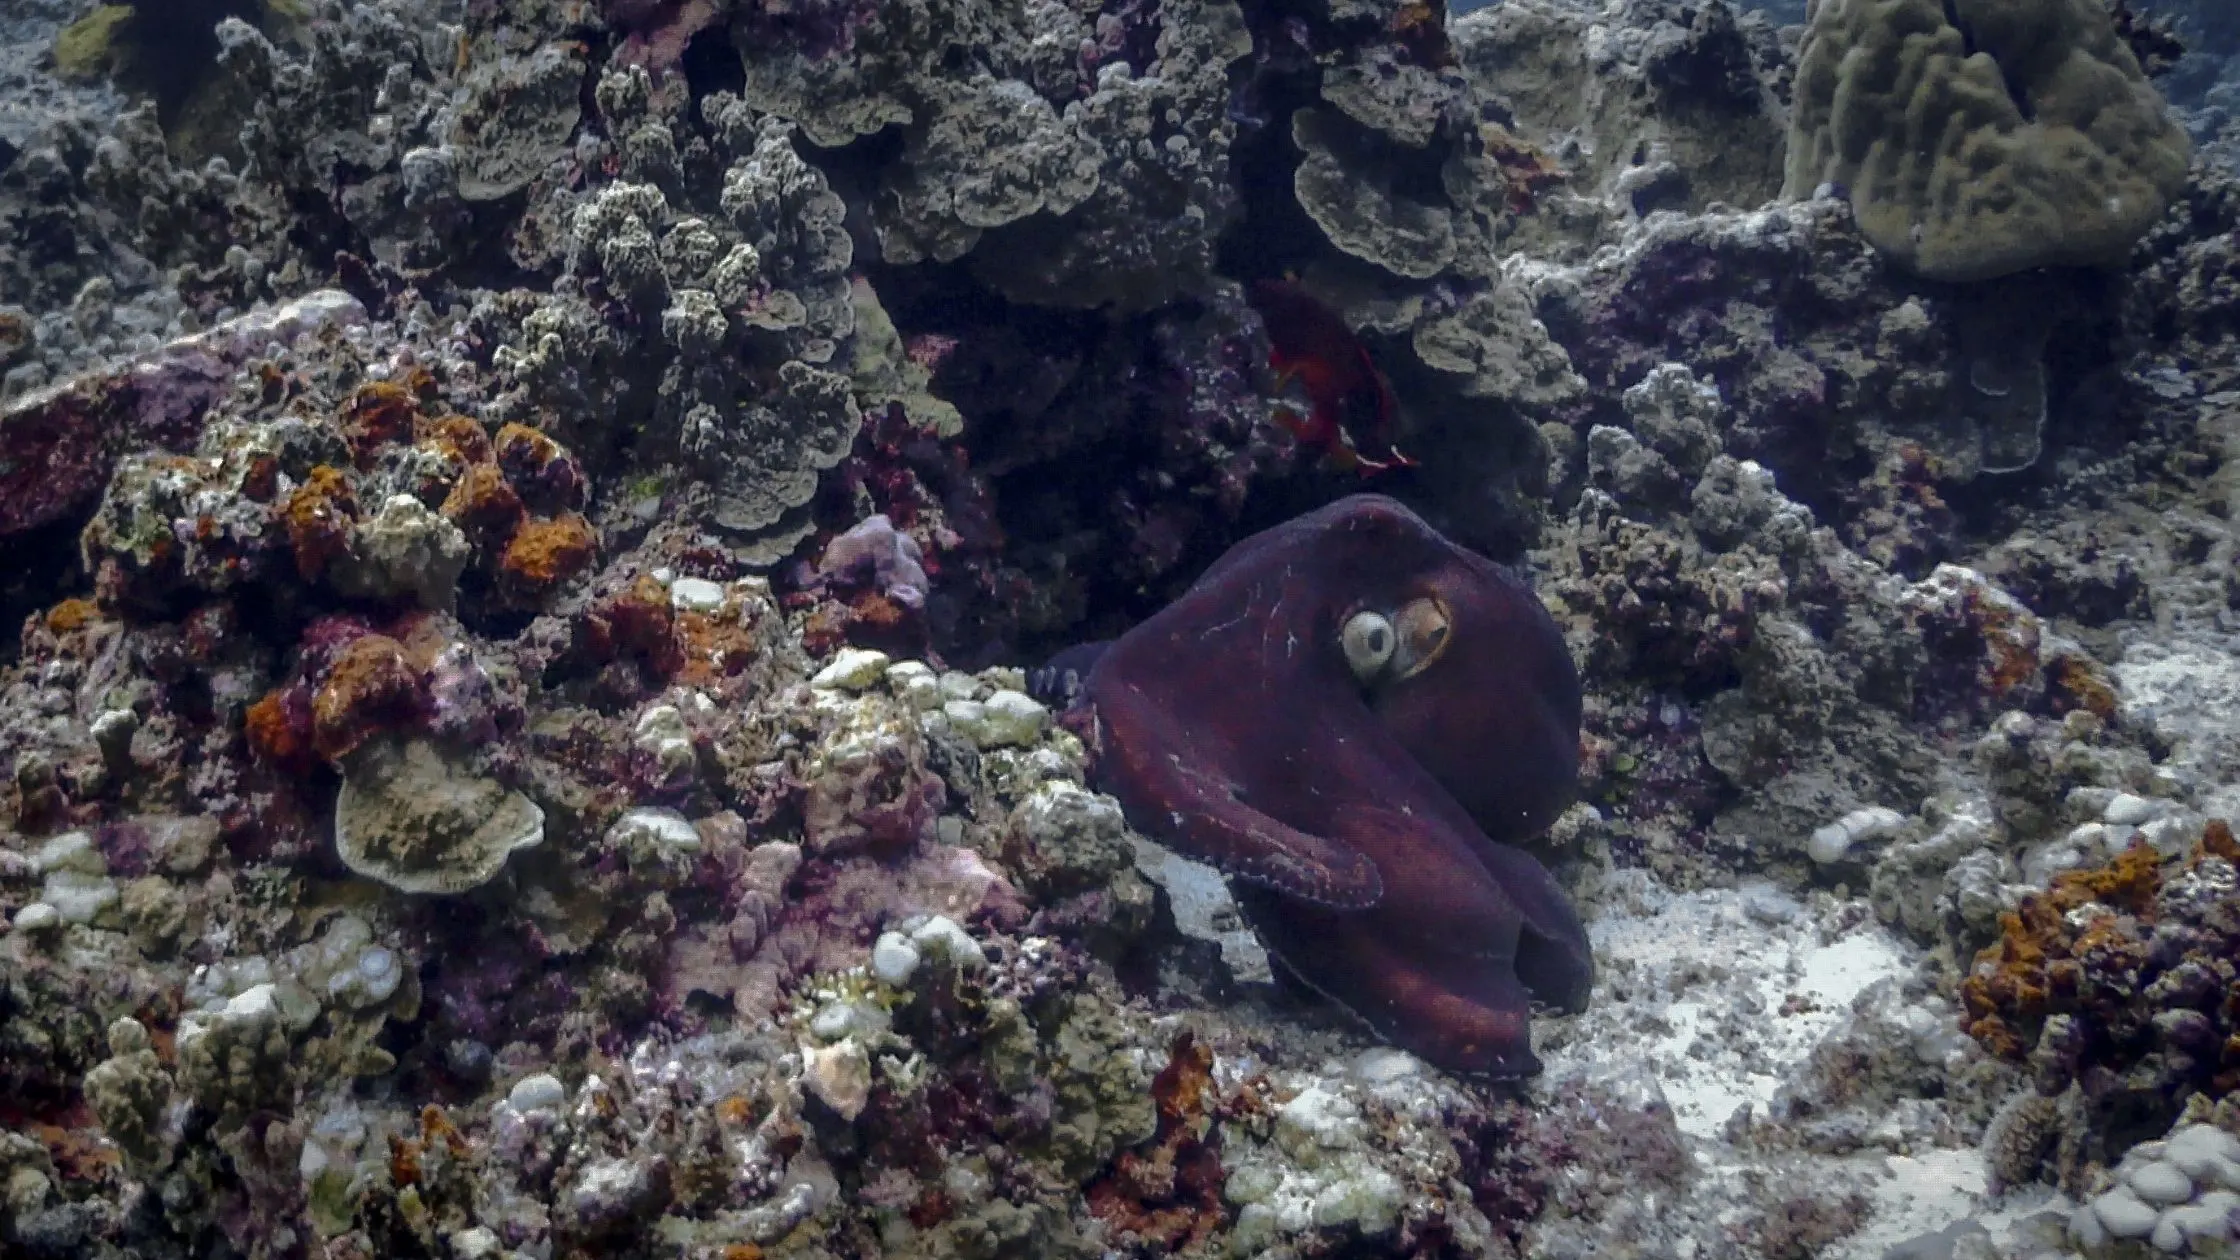 A picture of coral and an octopus in the Apo reef.